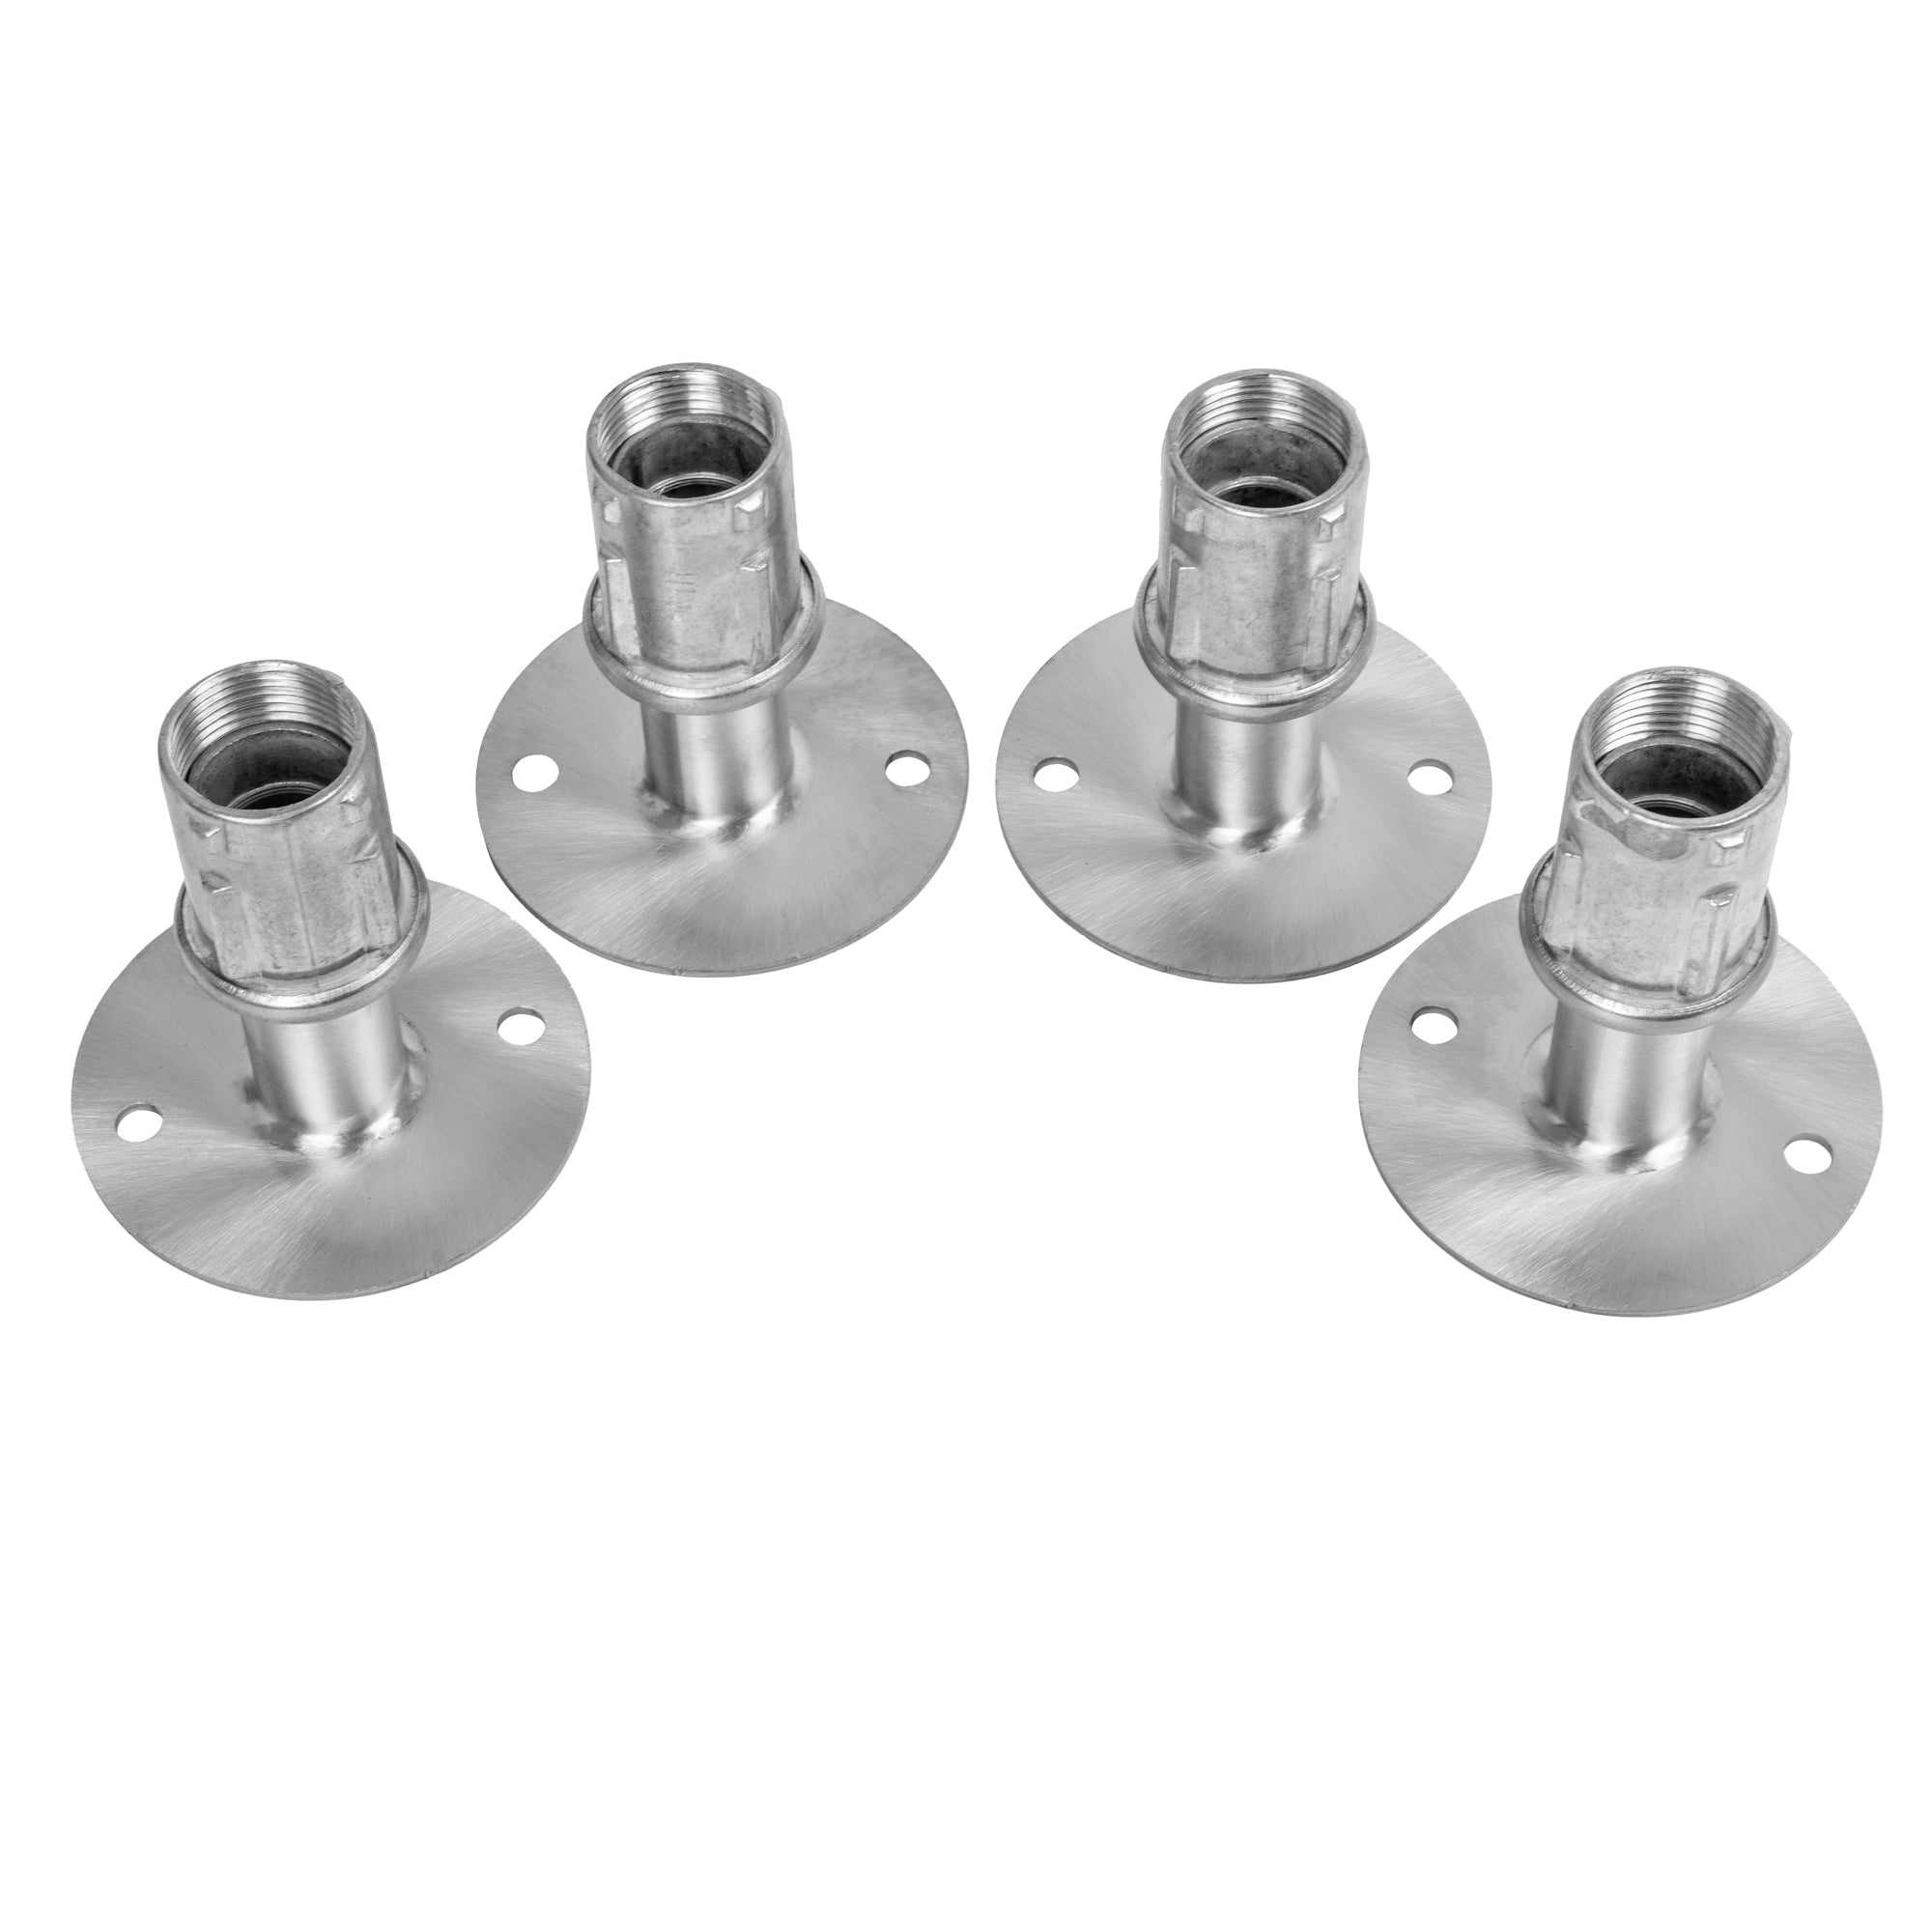 Leyso FT-SP3 Set of 4 Stainless Steel Flanged Feet 1” Adjustable w/ 3-½” Diameter Flange for Stainless Steel 1-⅝” O.D. Tubing (Flanged Foot)